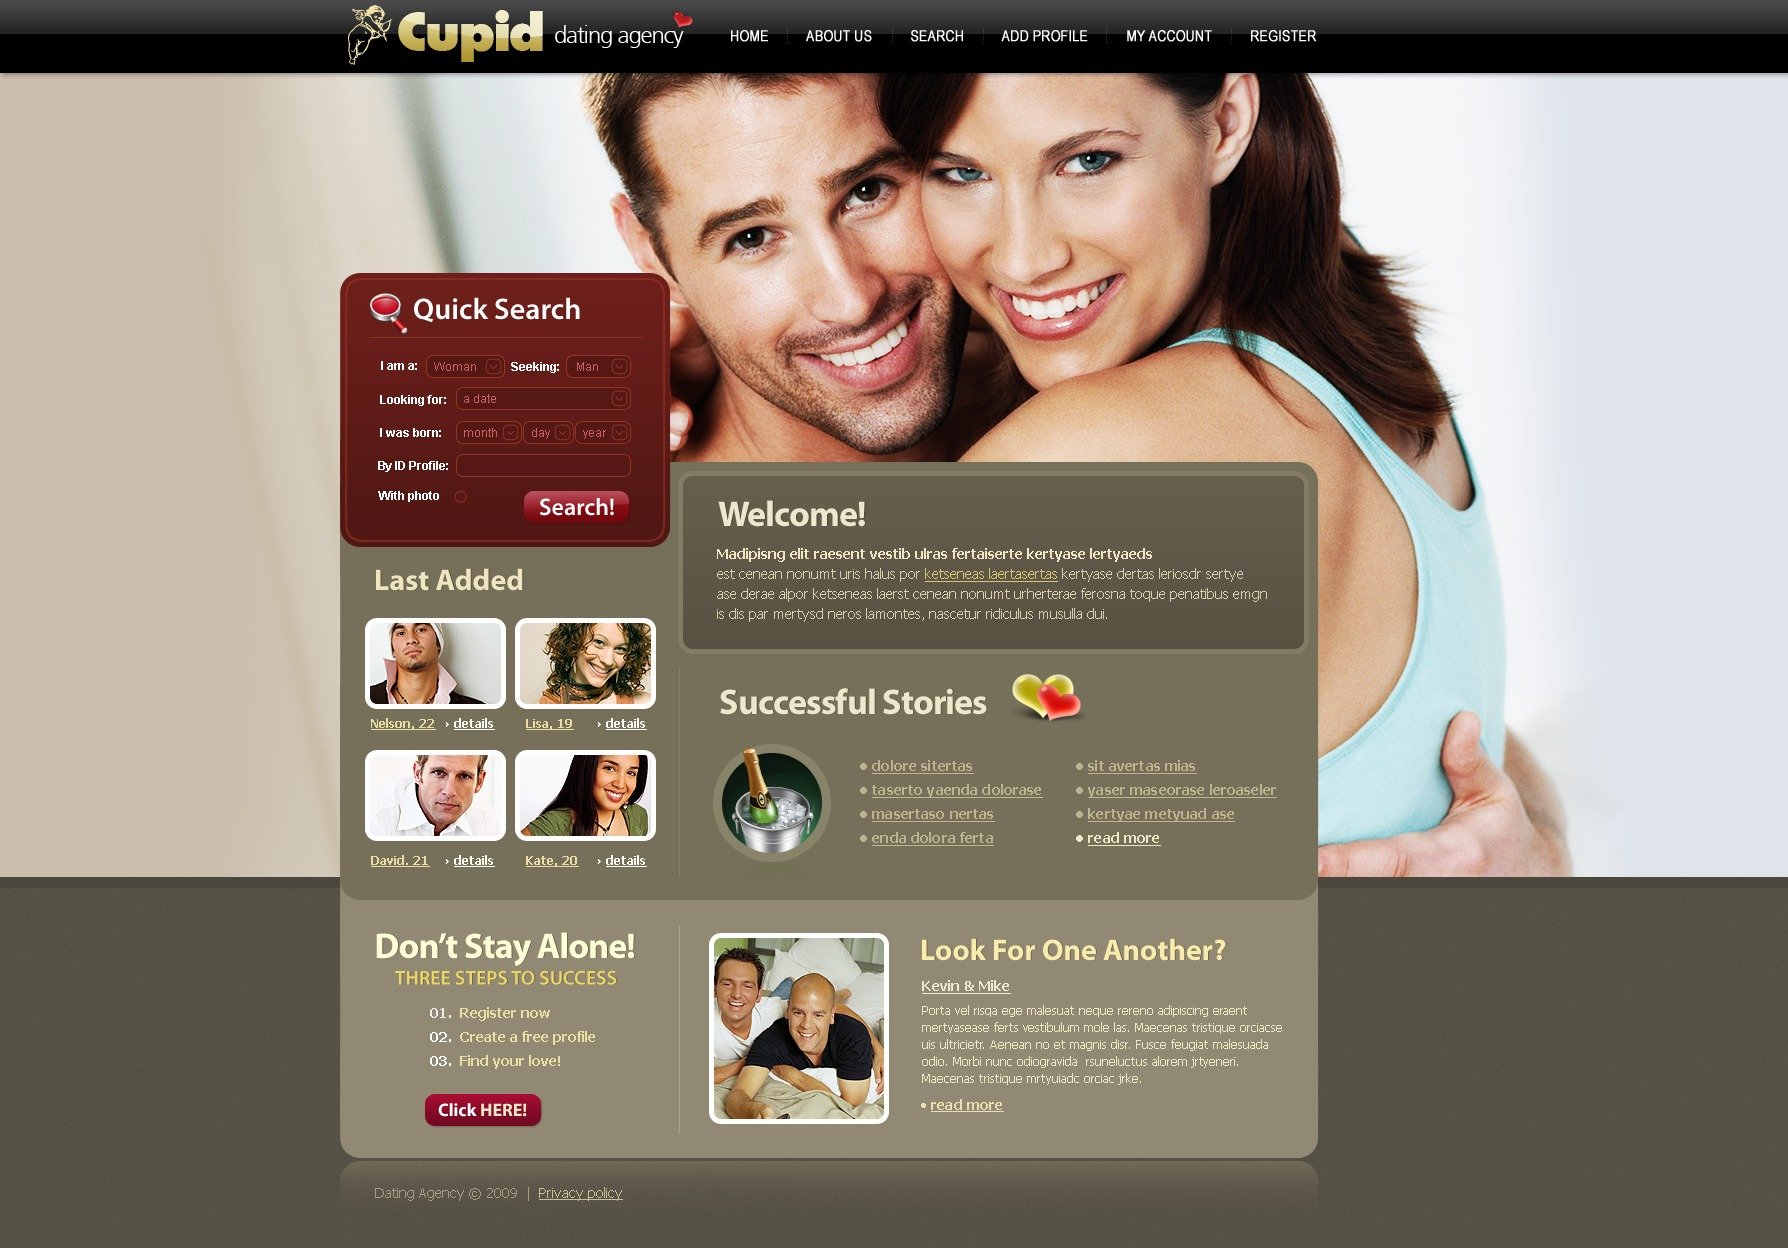 The Easy Guide to Online Dating Web Sites – Selecting Your Love Made Simple